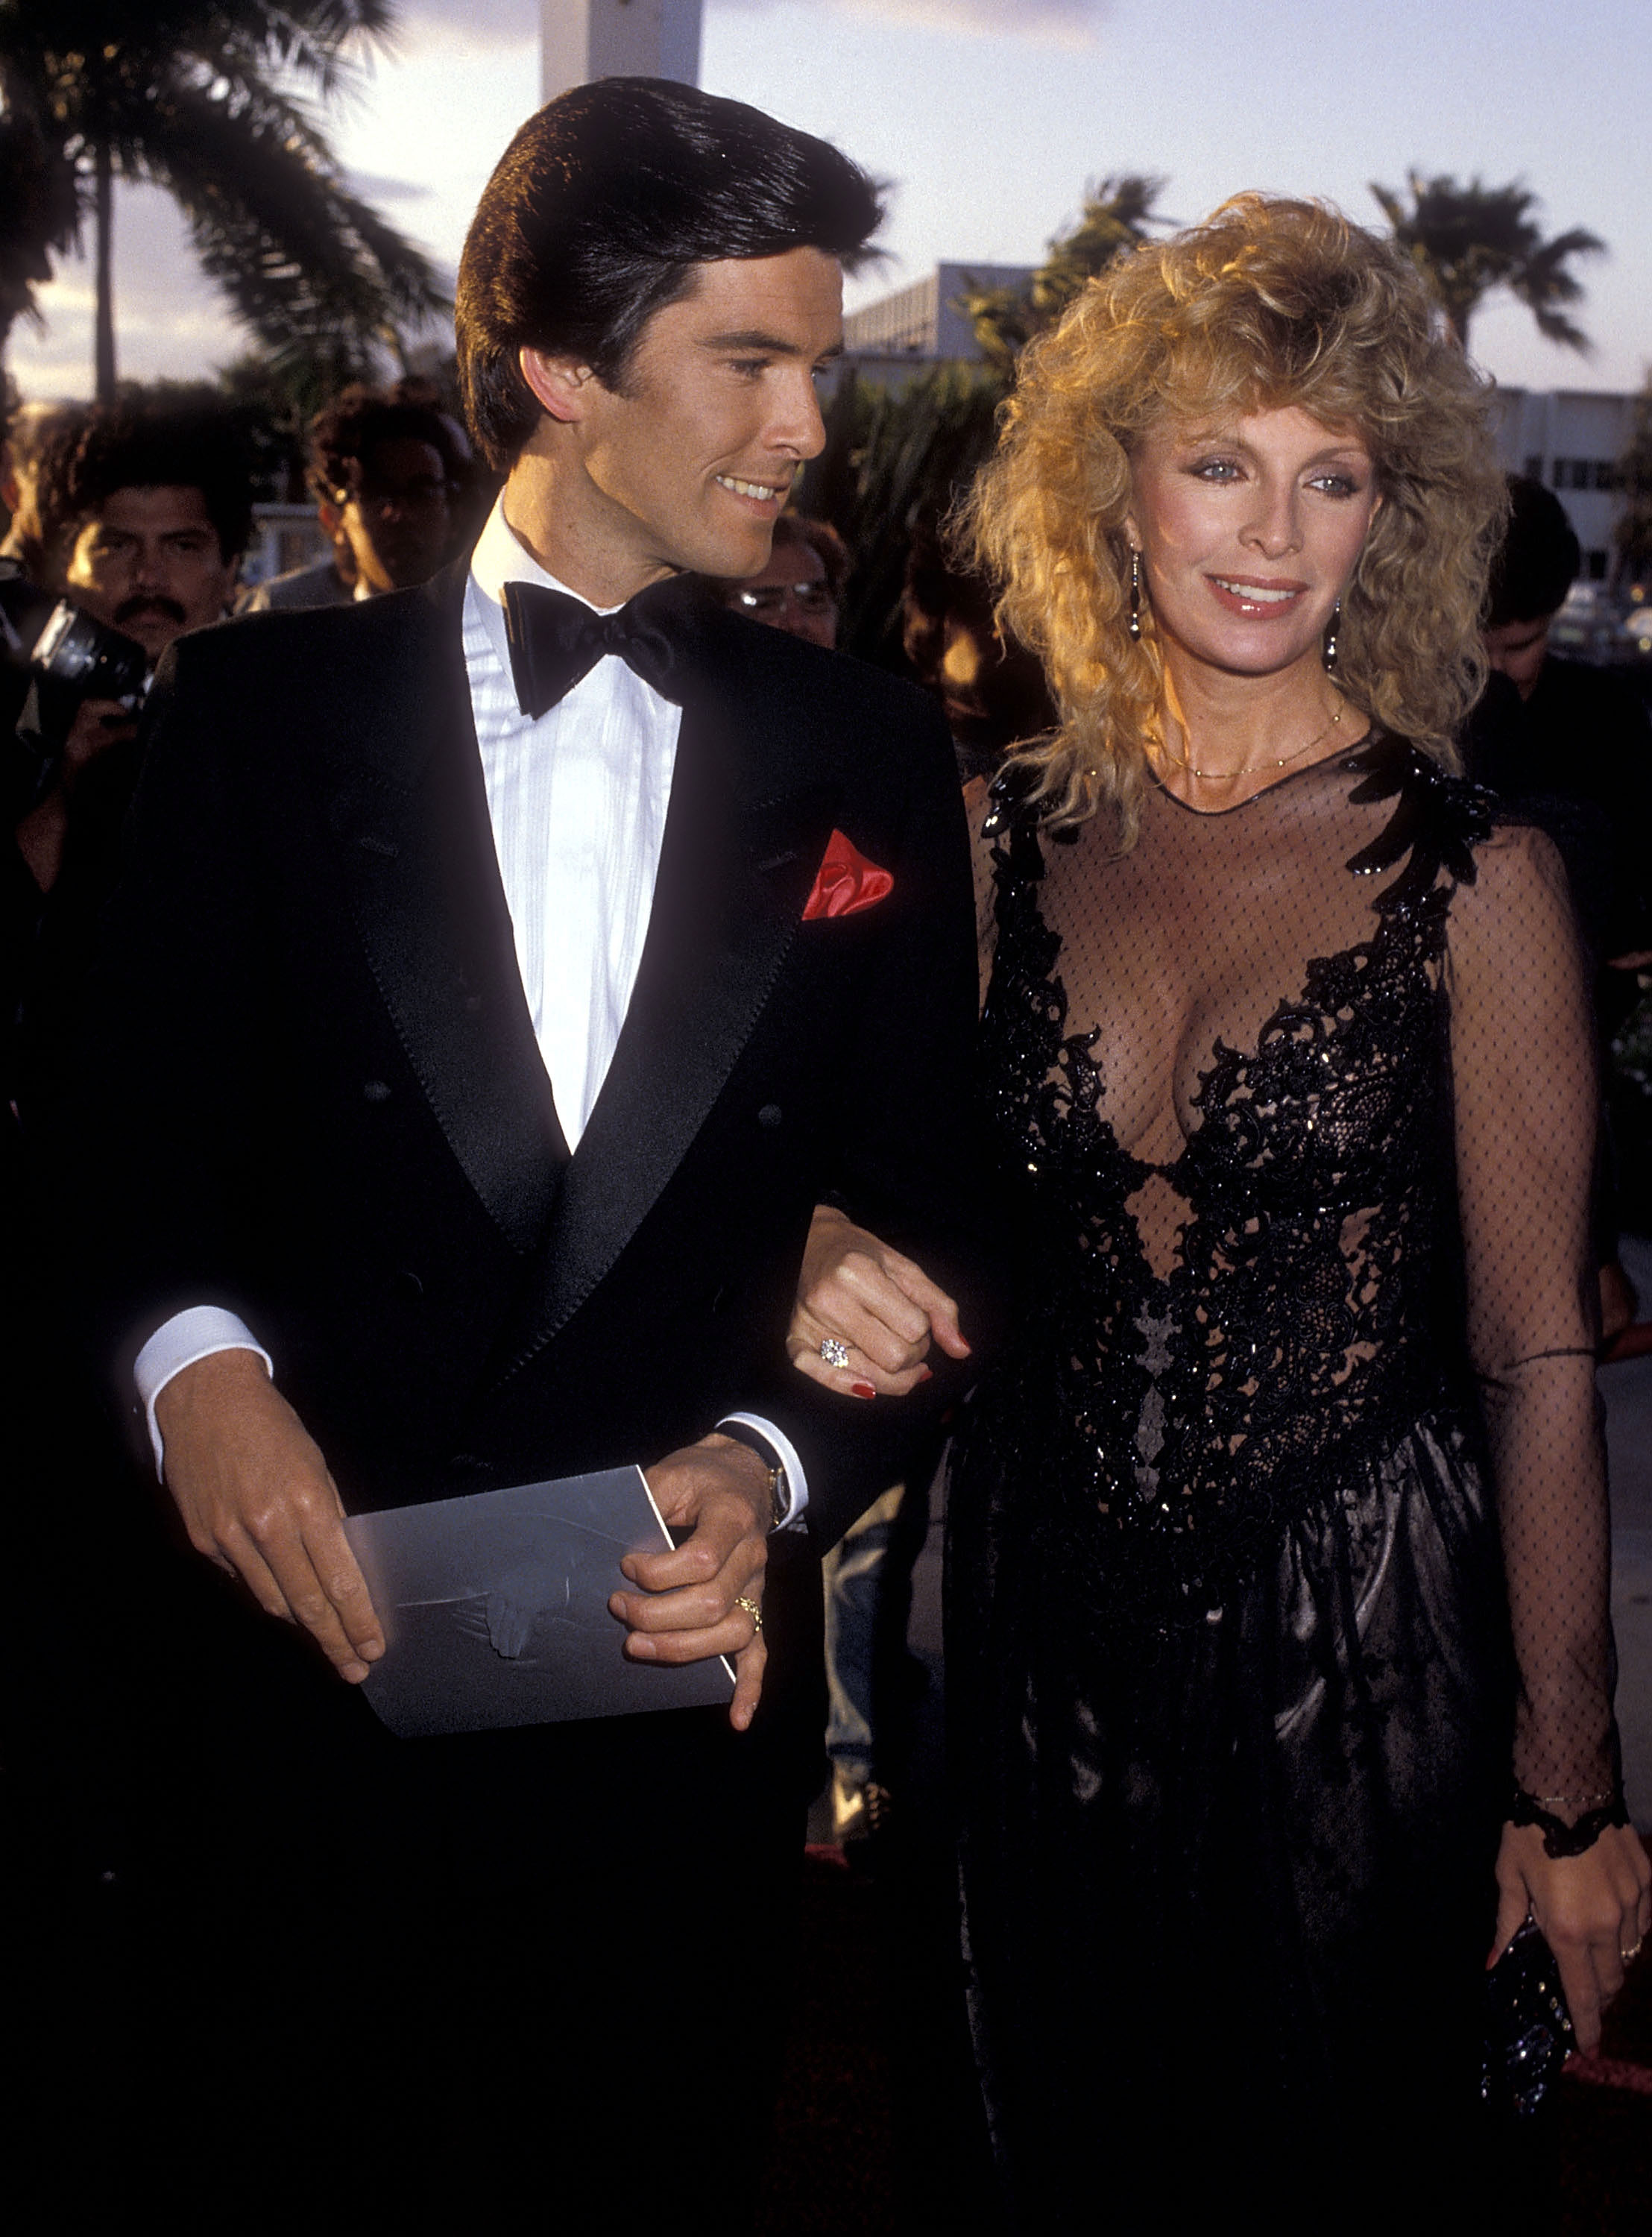 Pierce Brosnan and Cassandra Harris at the 10th Annual People's Choice Awards at the Santa Monica Civic Auditorium on March 15, 1984 in Santa Monica, California. | Source: Getty Images